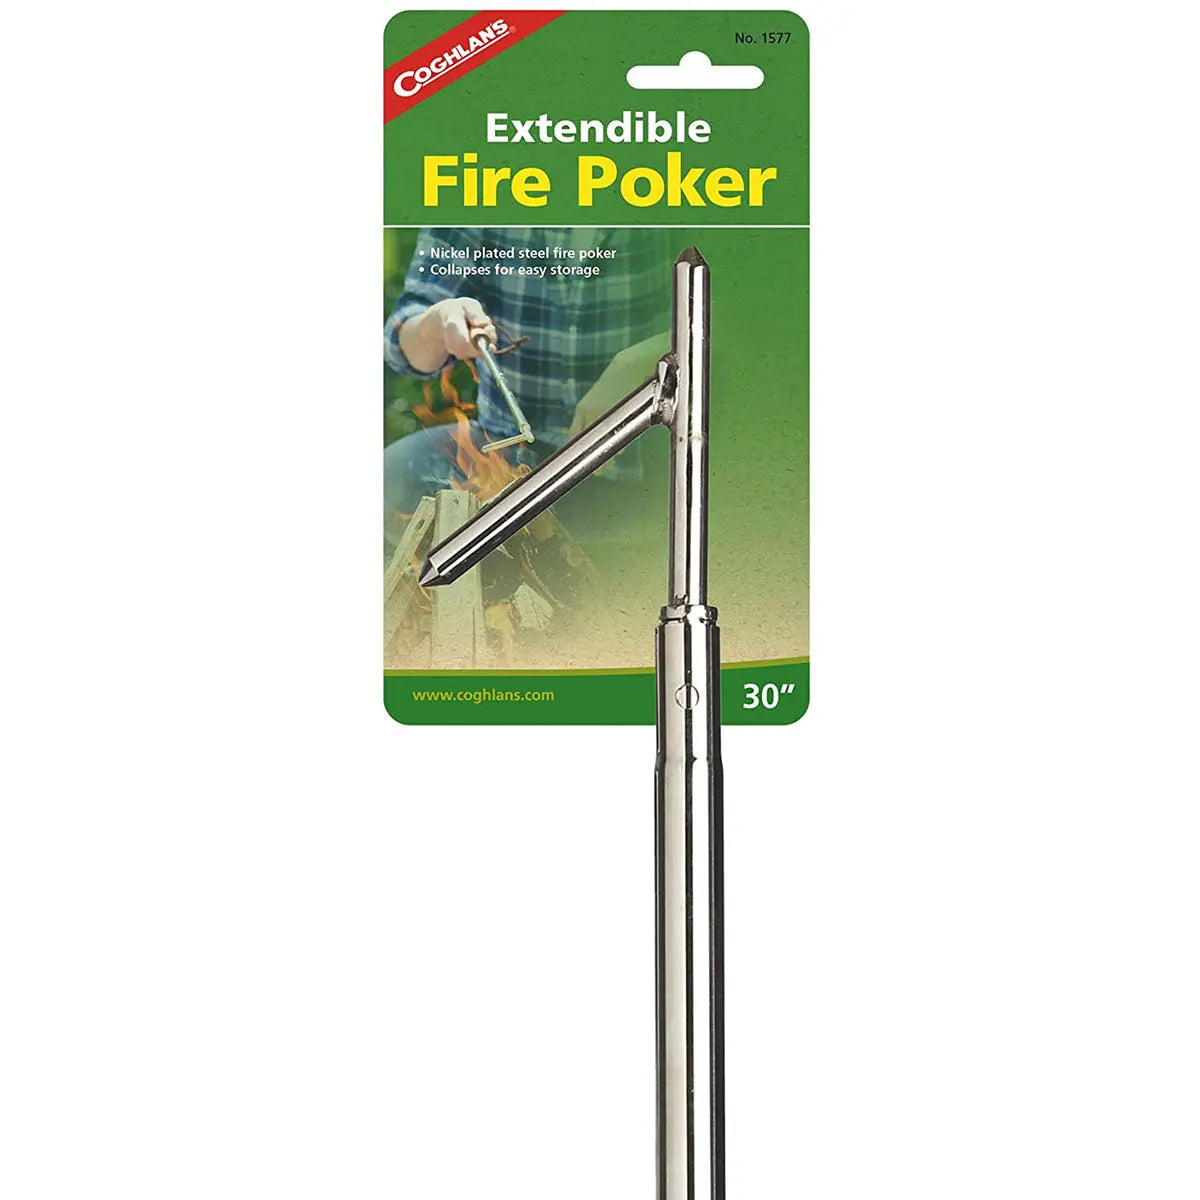 Coghlan's Extendible Fire Poker, Extends to 30", Collapsible Backpacking Camping Coghlan's